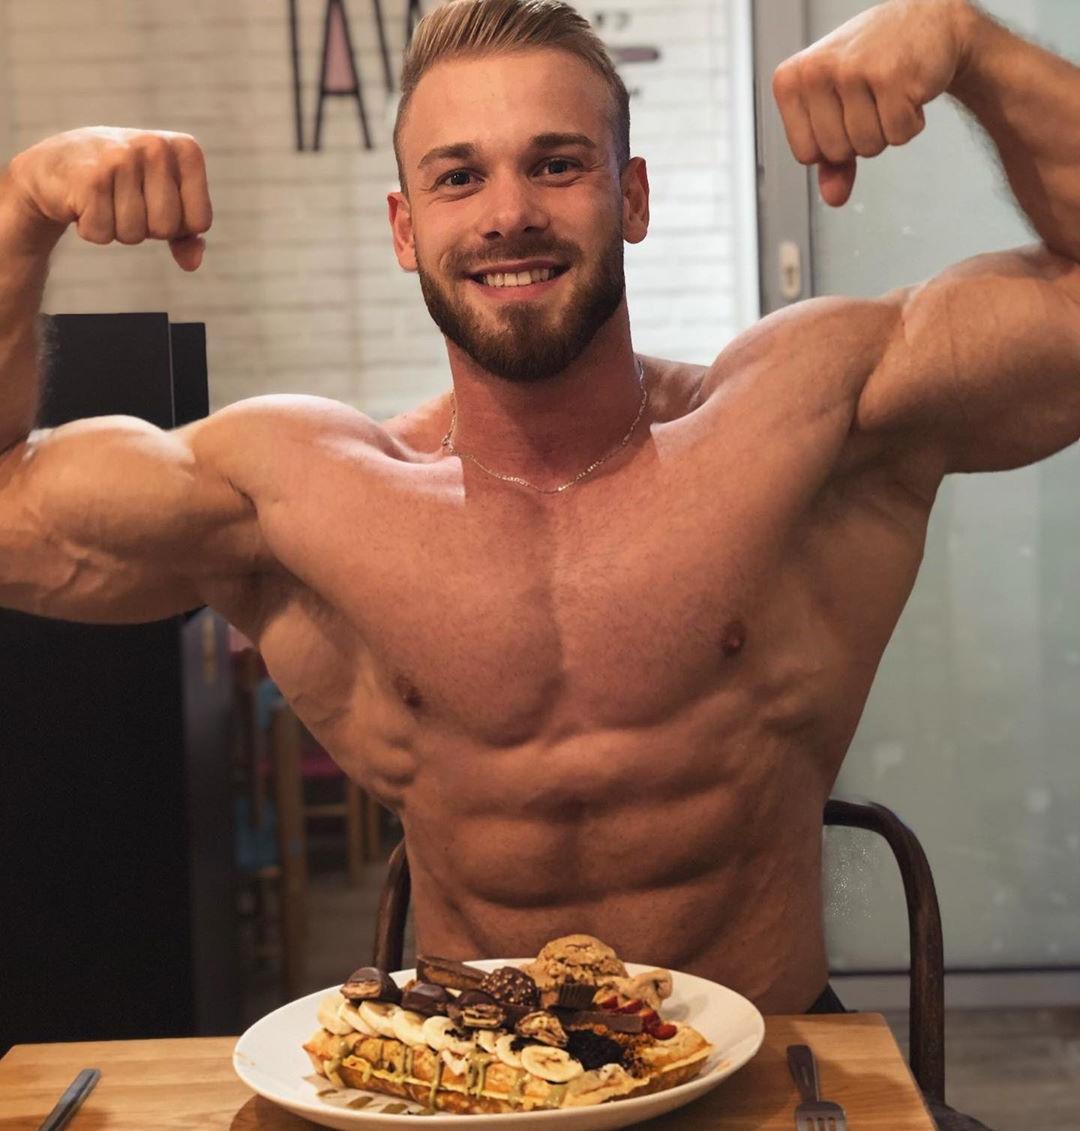 attractive-shirtless-muscle-hunk-biceps-flex-smiling-eating-food